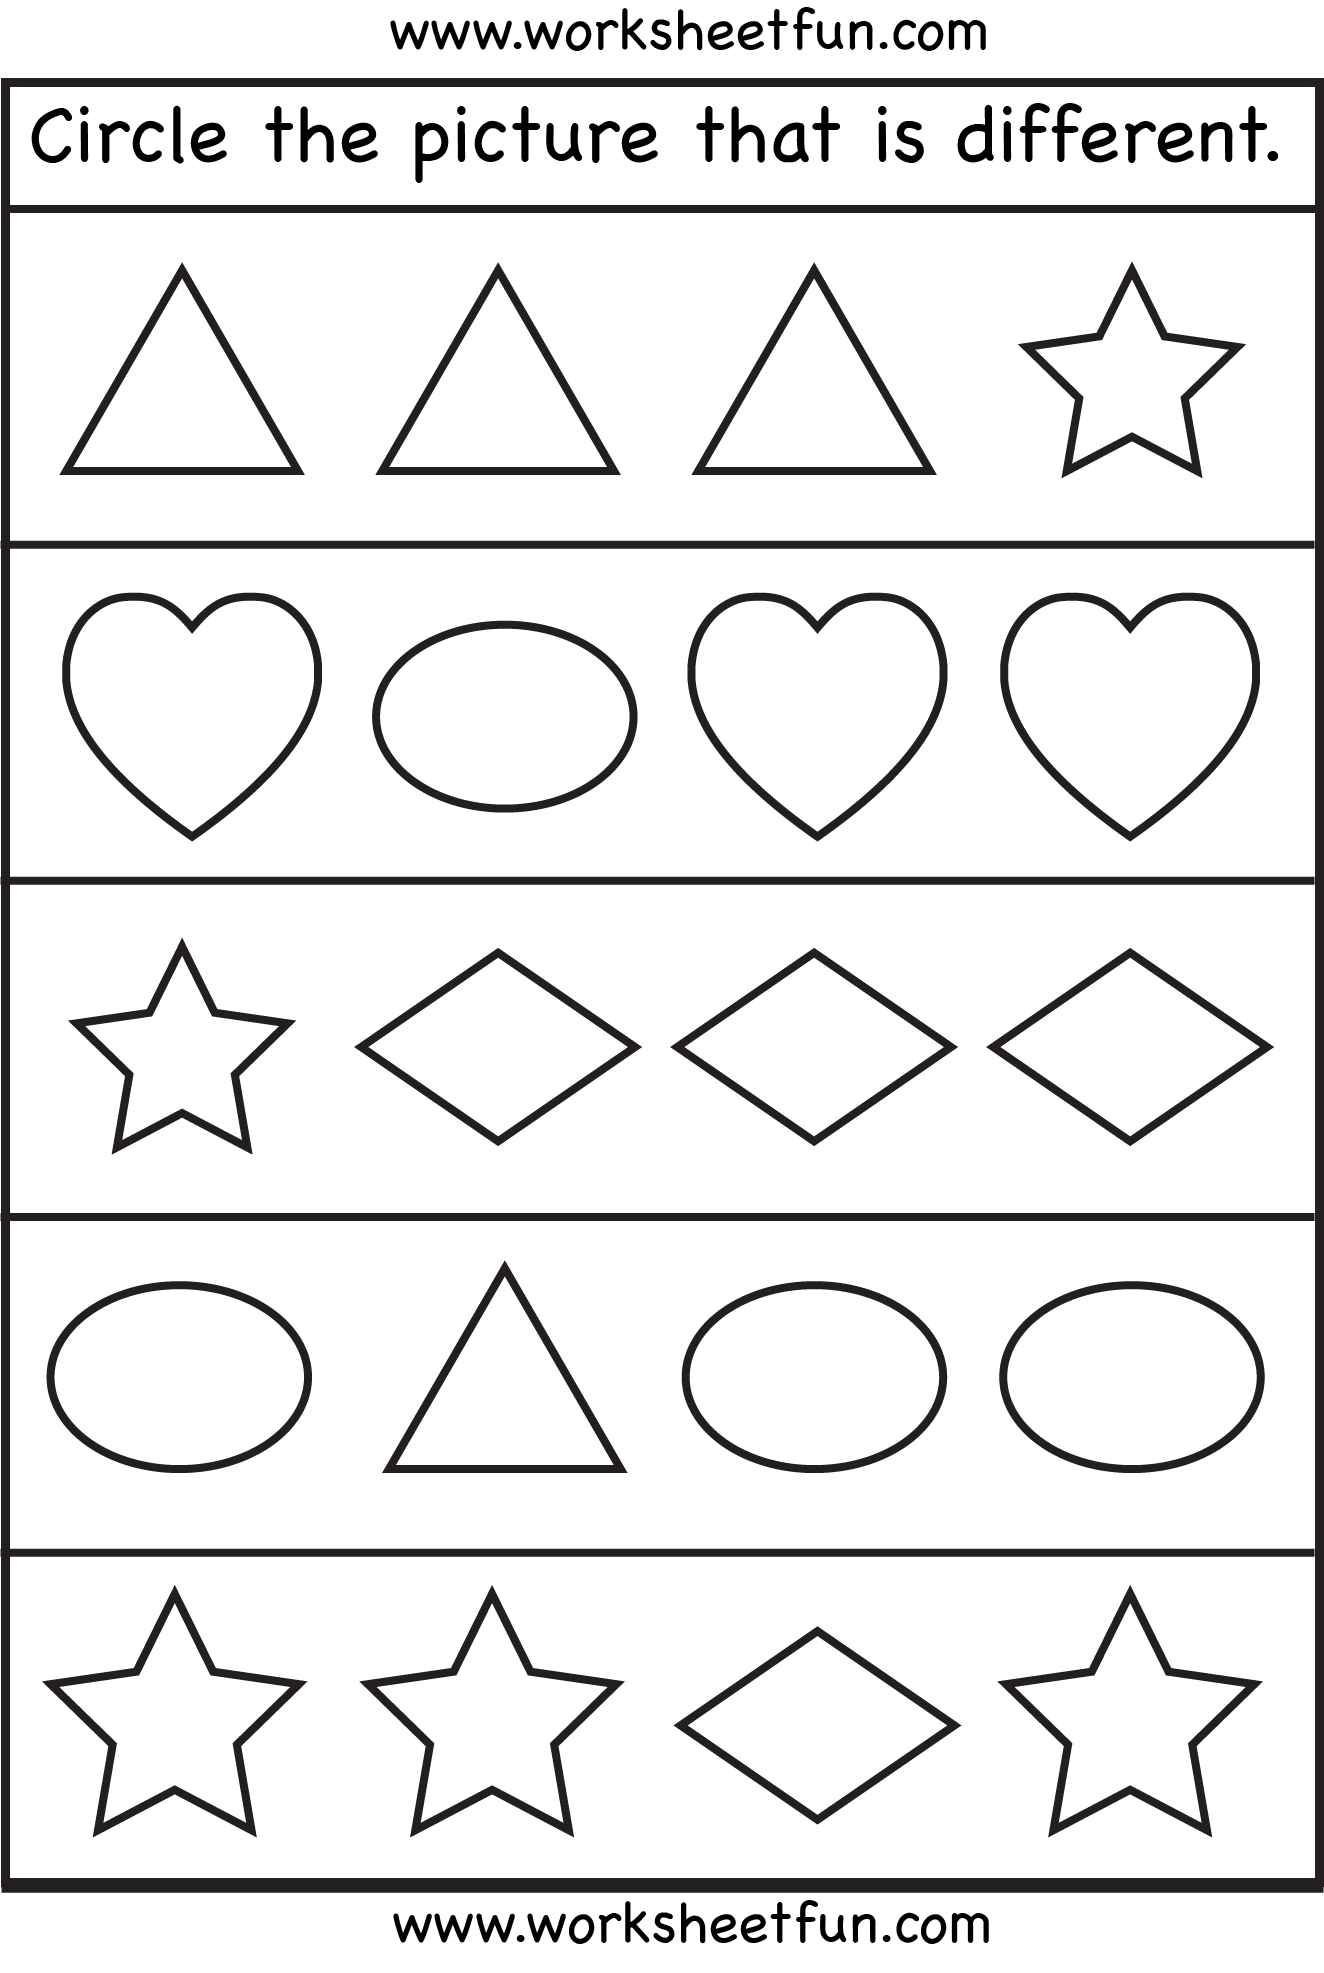 Same and Different Shapes One Worksheet / FREE Printable Worksheets